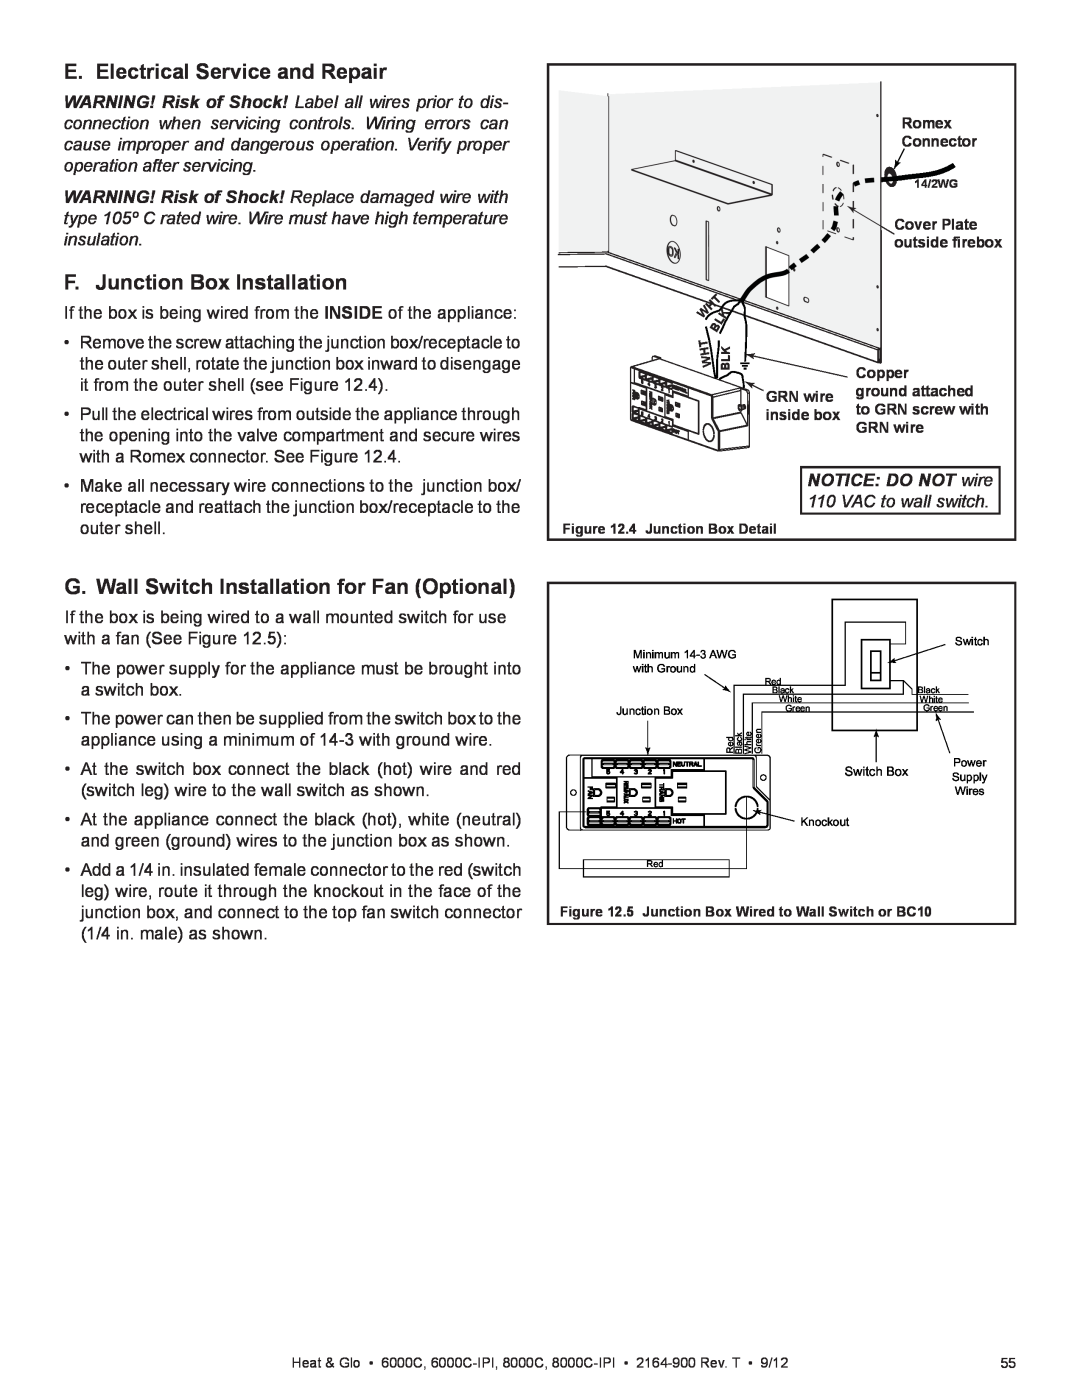 Heat & Glo LifeStyle 6000C manual E. Electrical Service and Repair, F. Junction Box Installation, NOTICE: DO NOT wire 